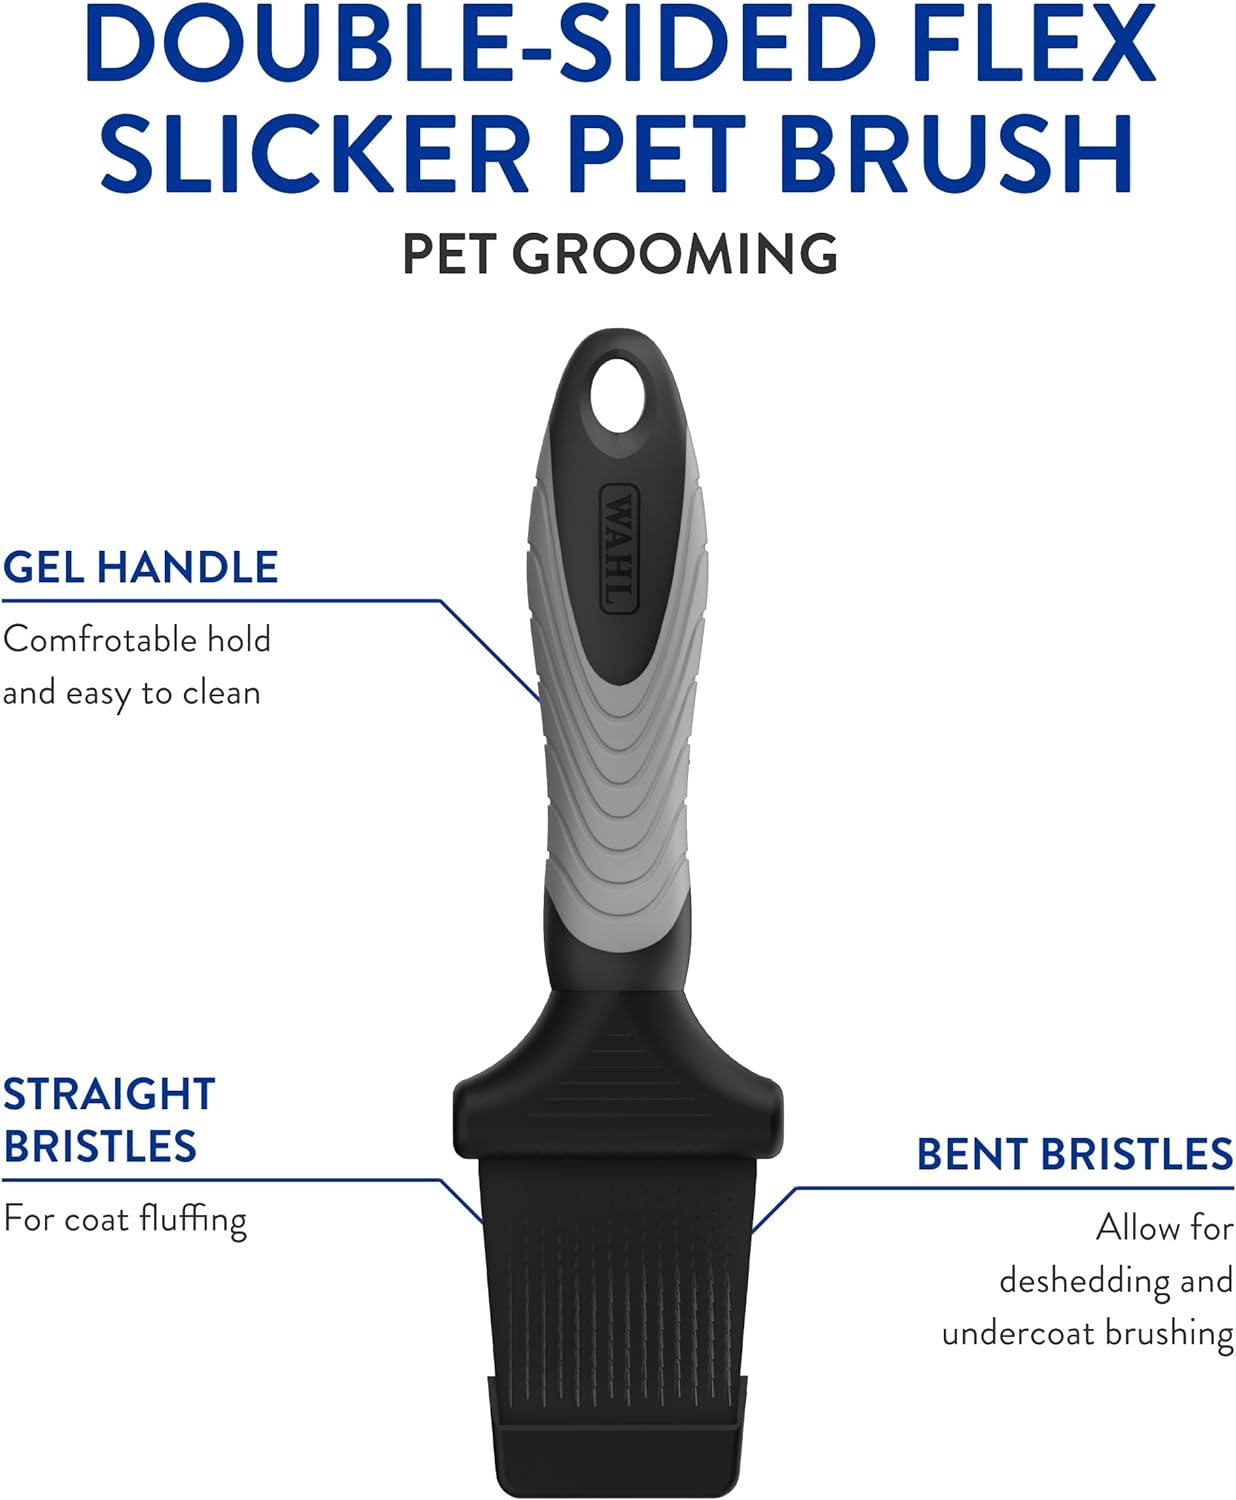 WAHL Professional Animal Double-Sided Flex Slicker Pet Brush for Dogs & Cats, 4 Pack